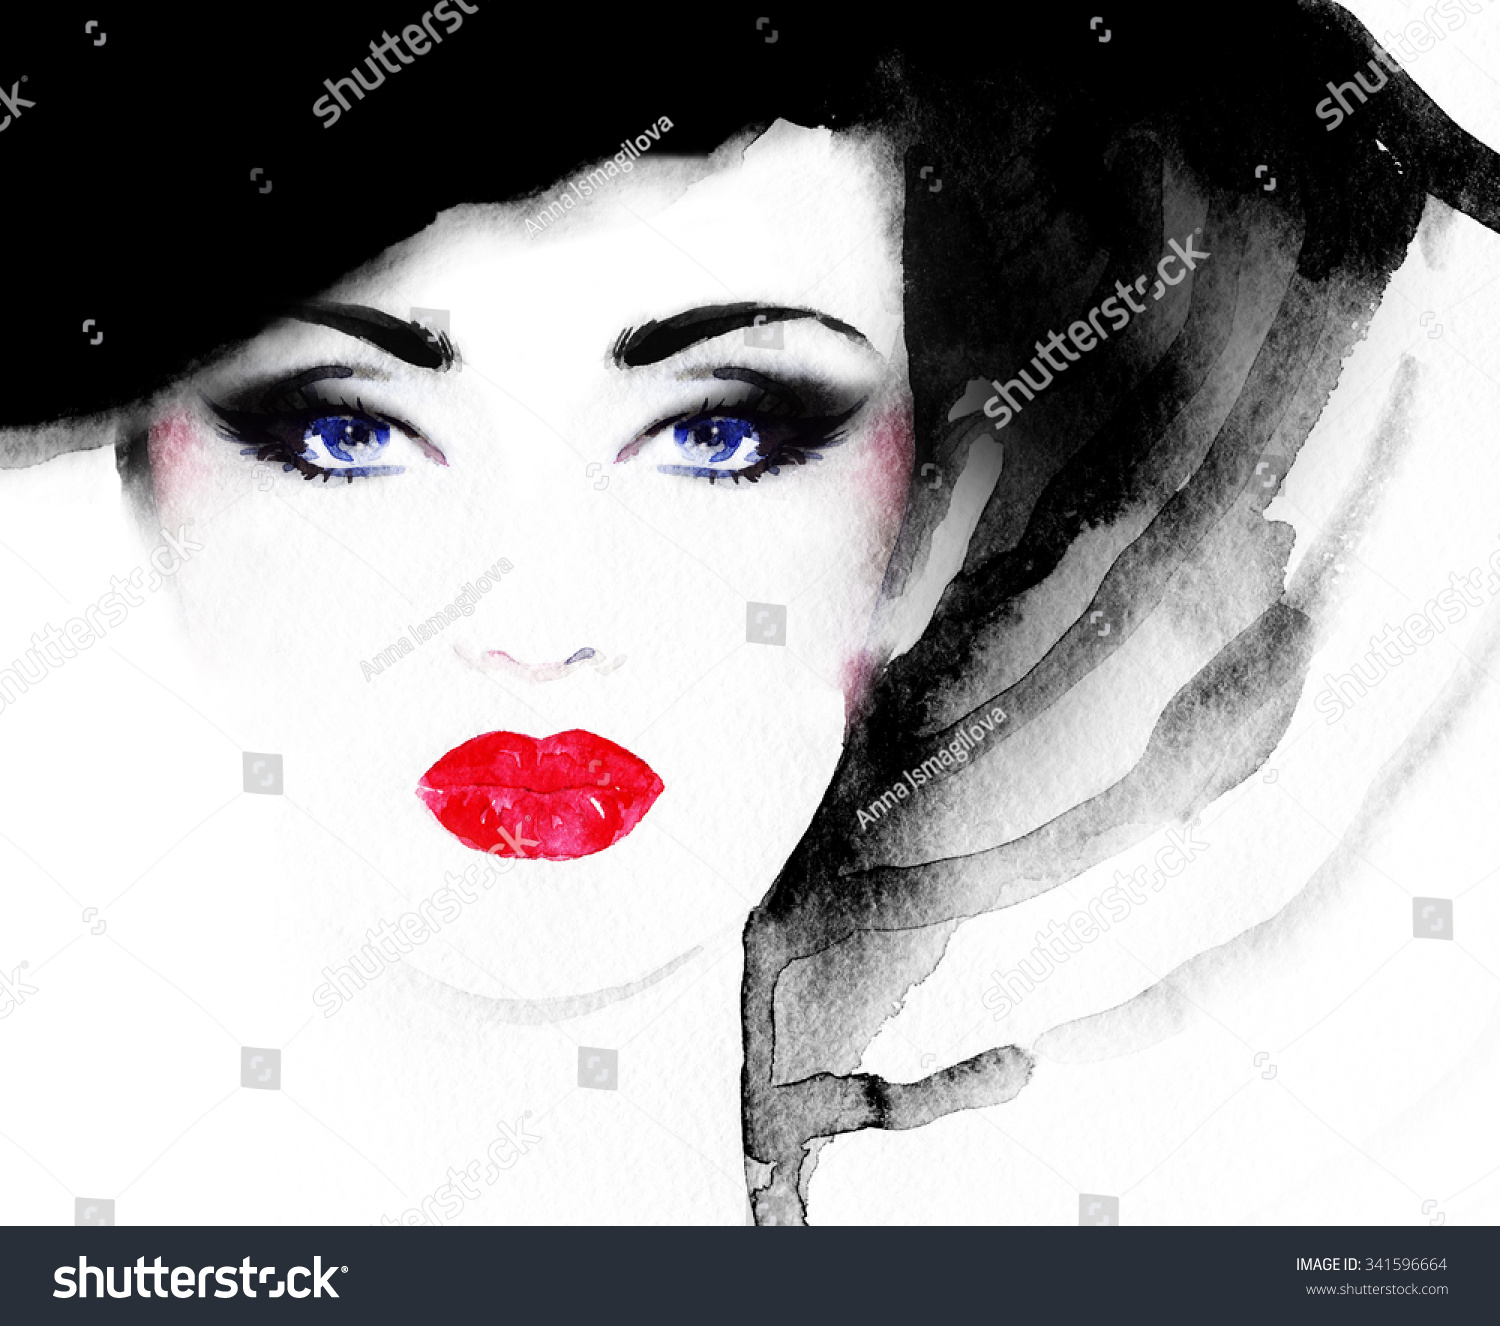 Woman Portrait Hat Abstract Watercolor Fashion Stock Illustration 341596664 Shutterstock